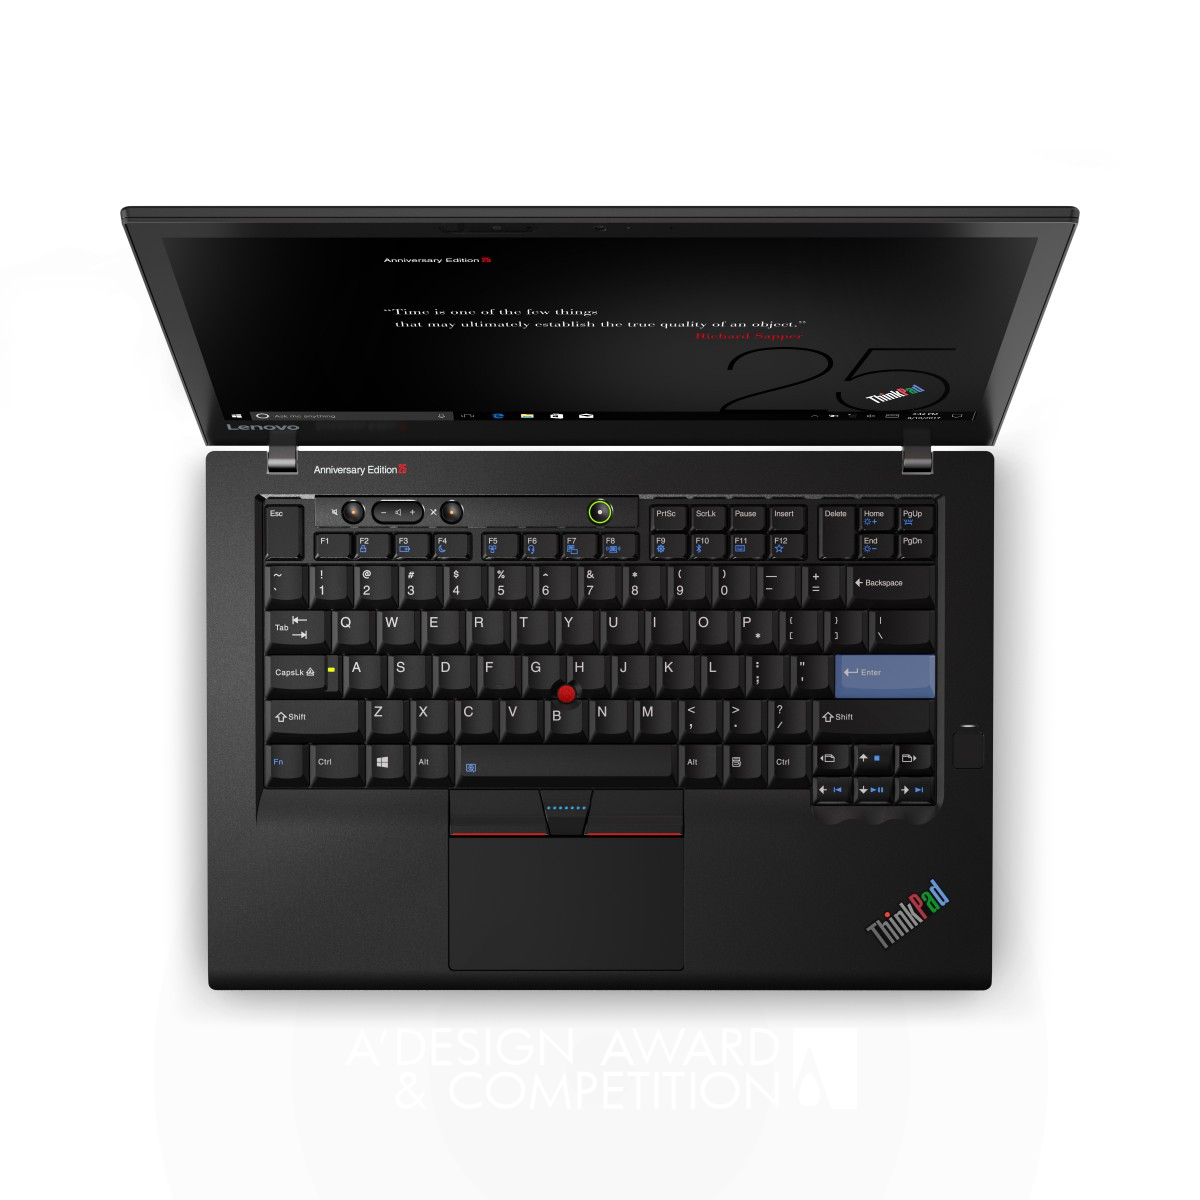 ThinkPad 25 Laptop Computer by Lenovo Design Group